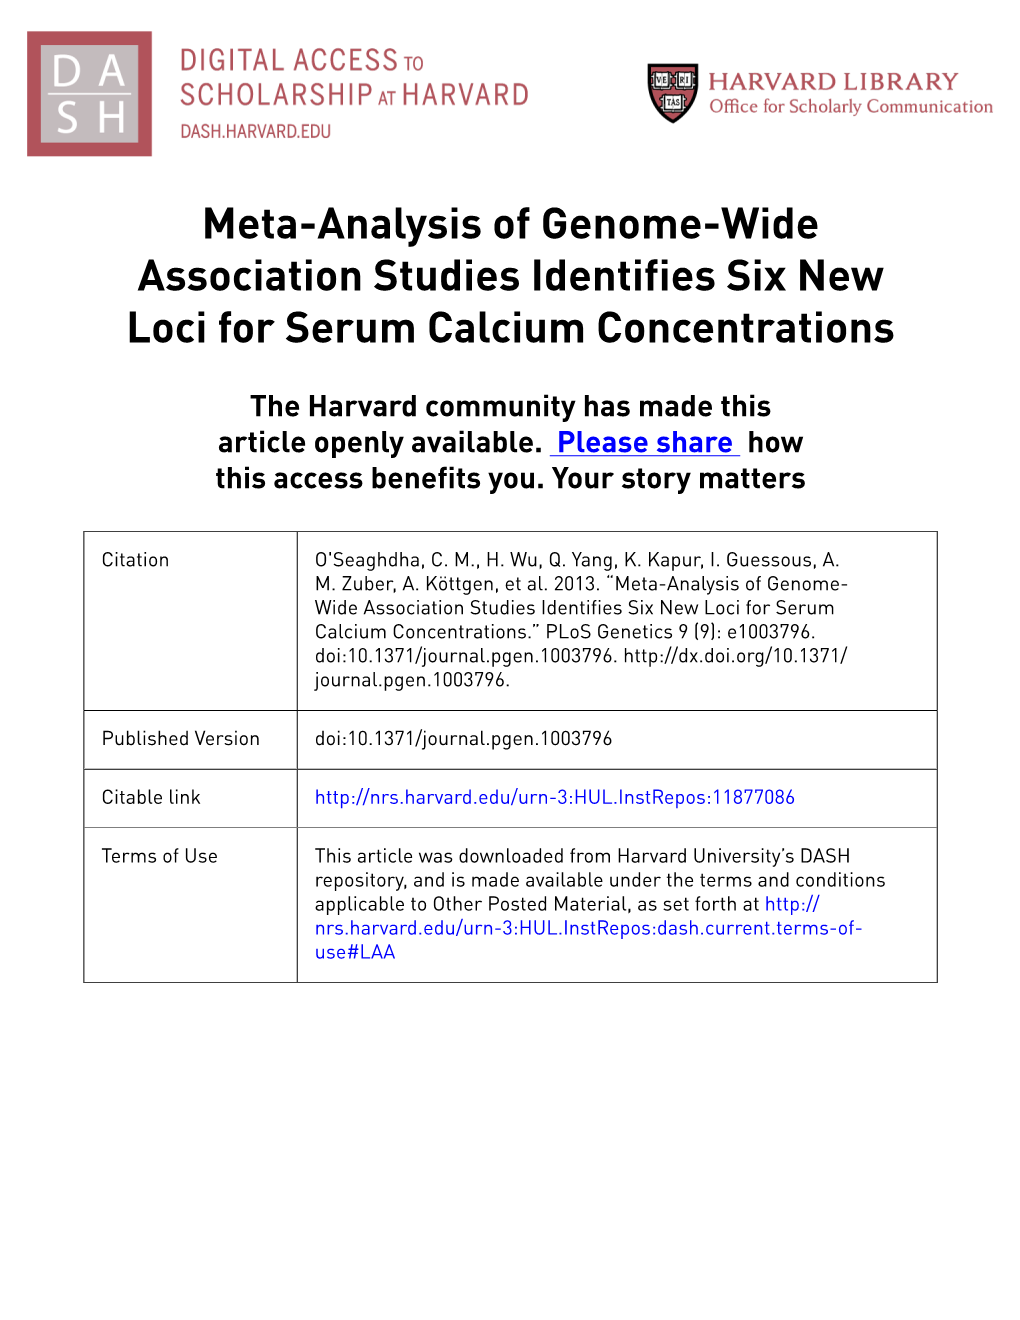 Meta-Analysis of Genome-Wide Association Studies Identifies Six New Loci for Serum Calcium Concentrations